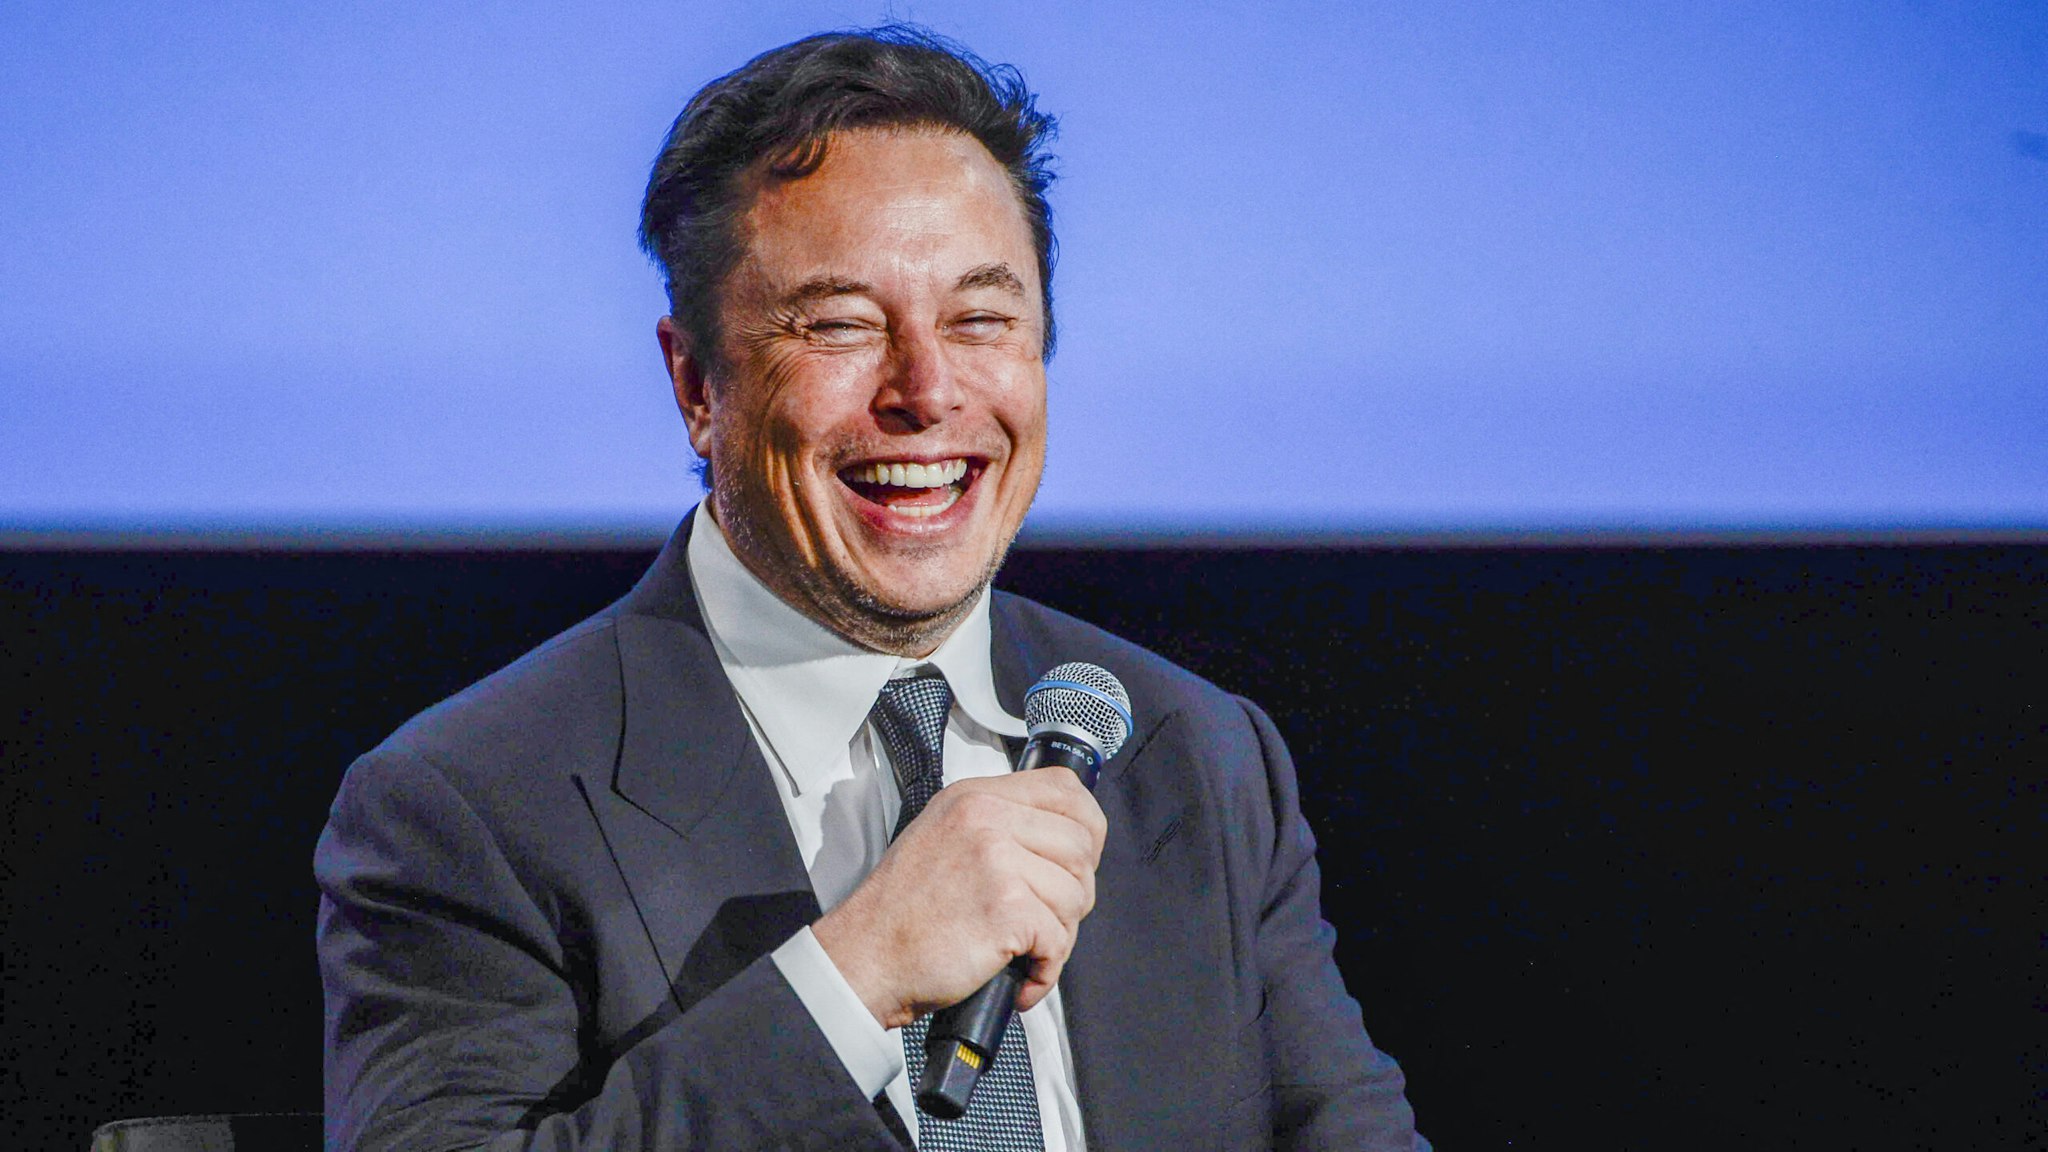 Tesla CEO Elon Musk smiles as he addresses guests at the Offshore Northern Seas 2022 (ONS) meeting in Stavanger, Norway on August 29, 2022. - The meeting, held in Stavanger from August 29 to September 1, 2022, presents the latest developments in Norway and internationally related to the energy, oil and gas sector.